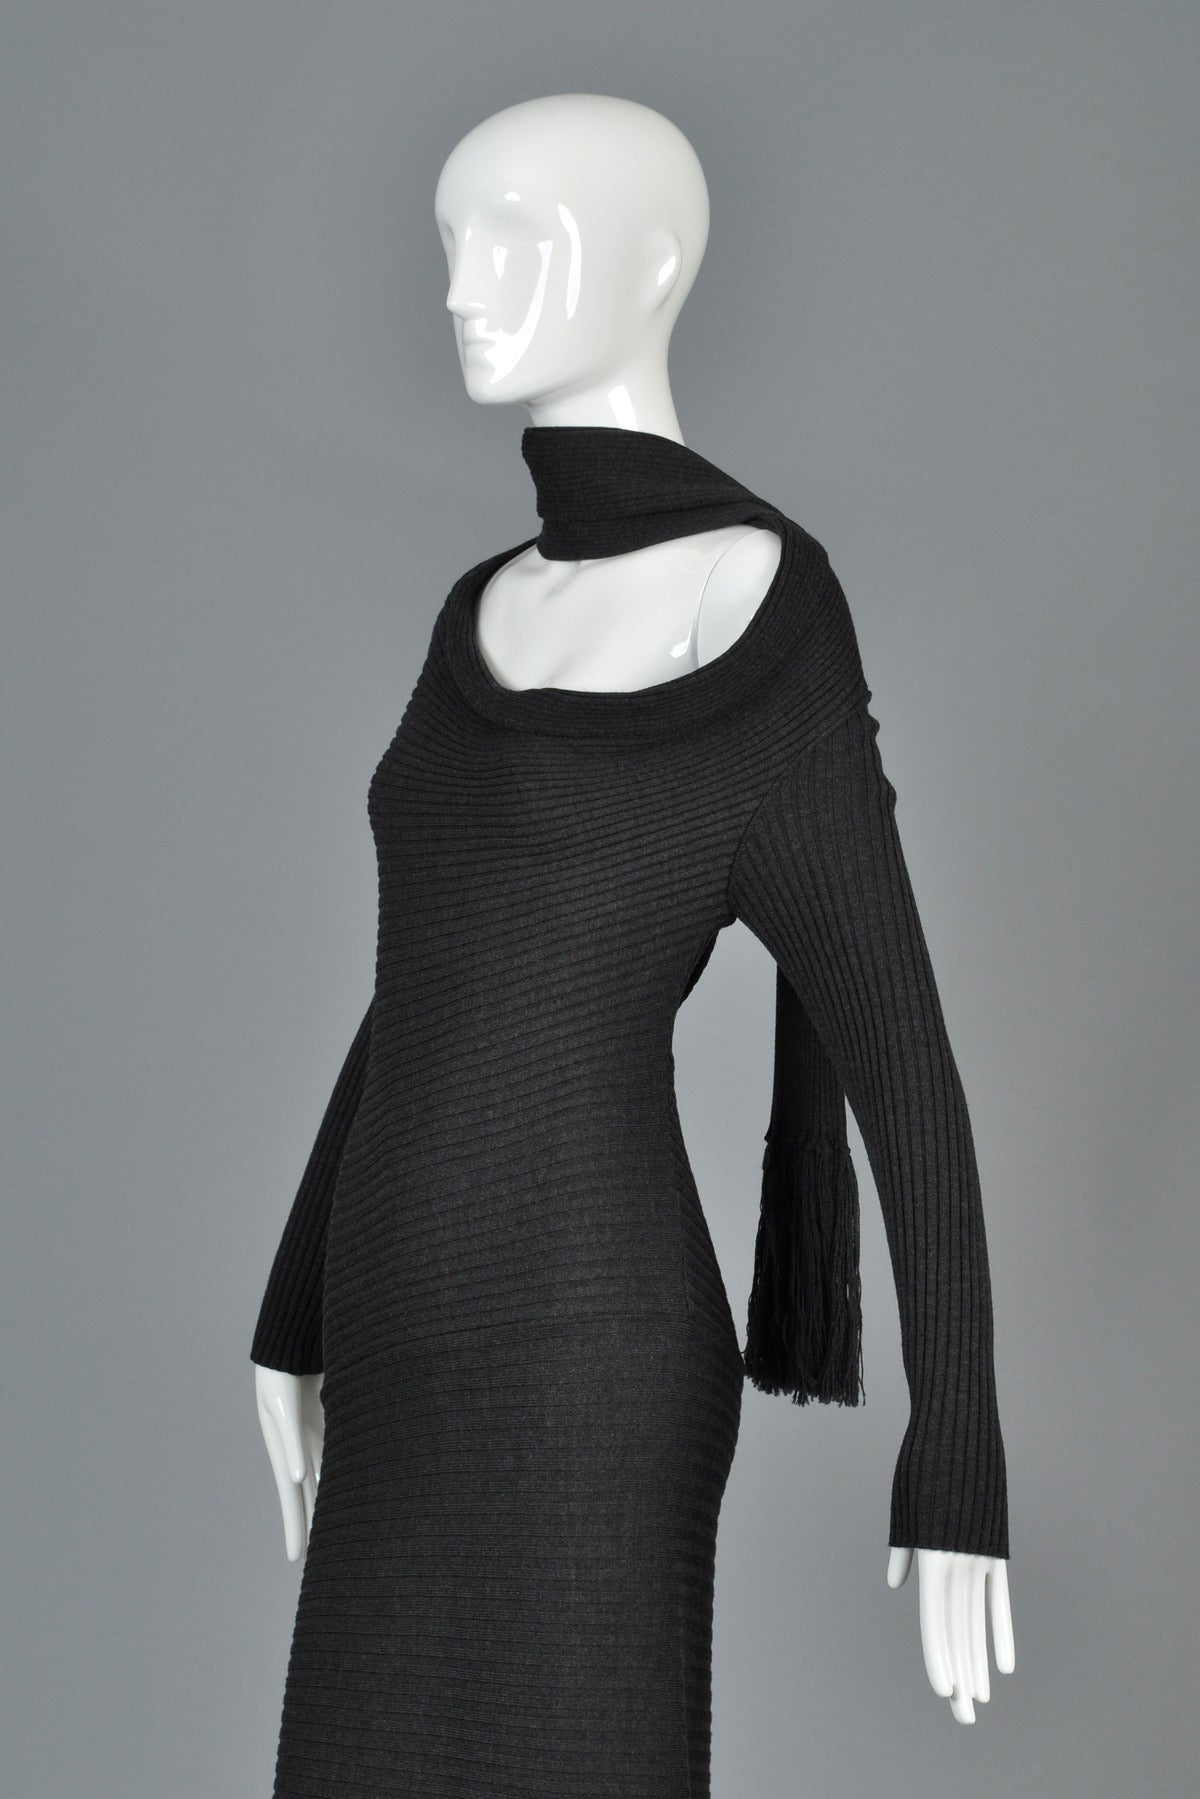 Iconic Jean Paul Gaultier Charcoal Knit Scarf Dress 1